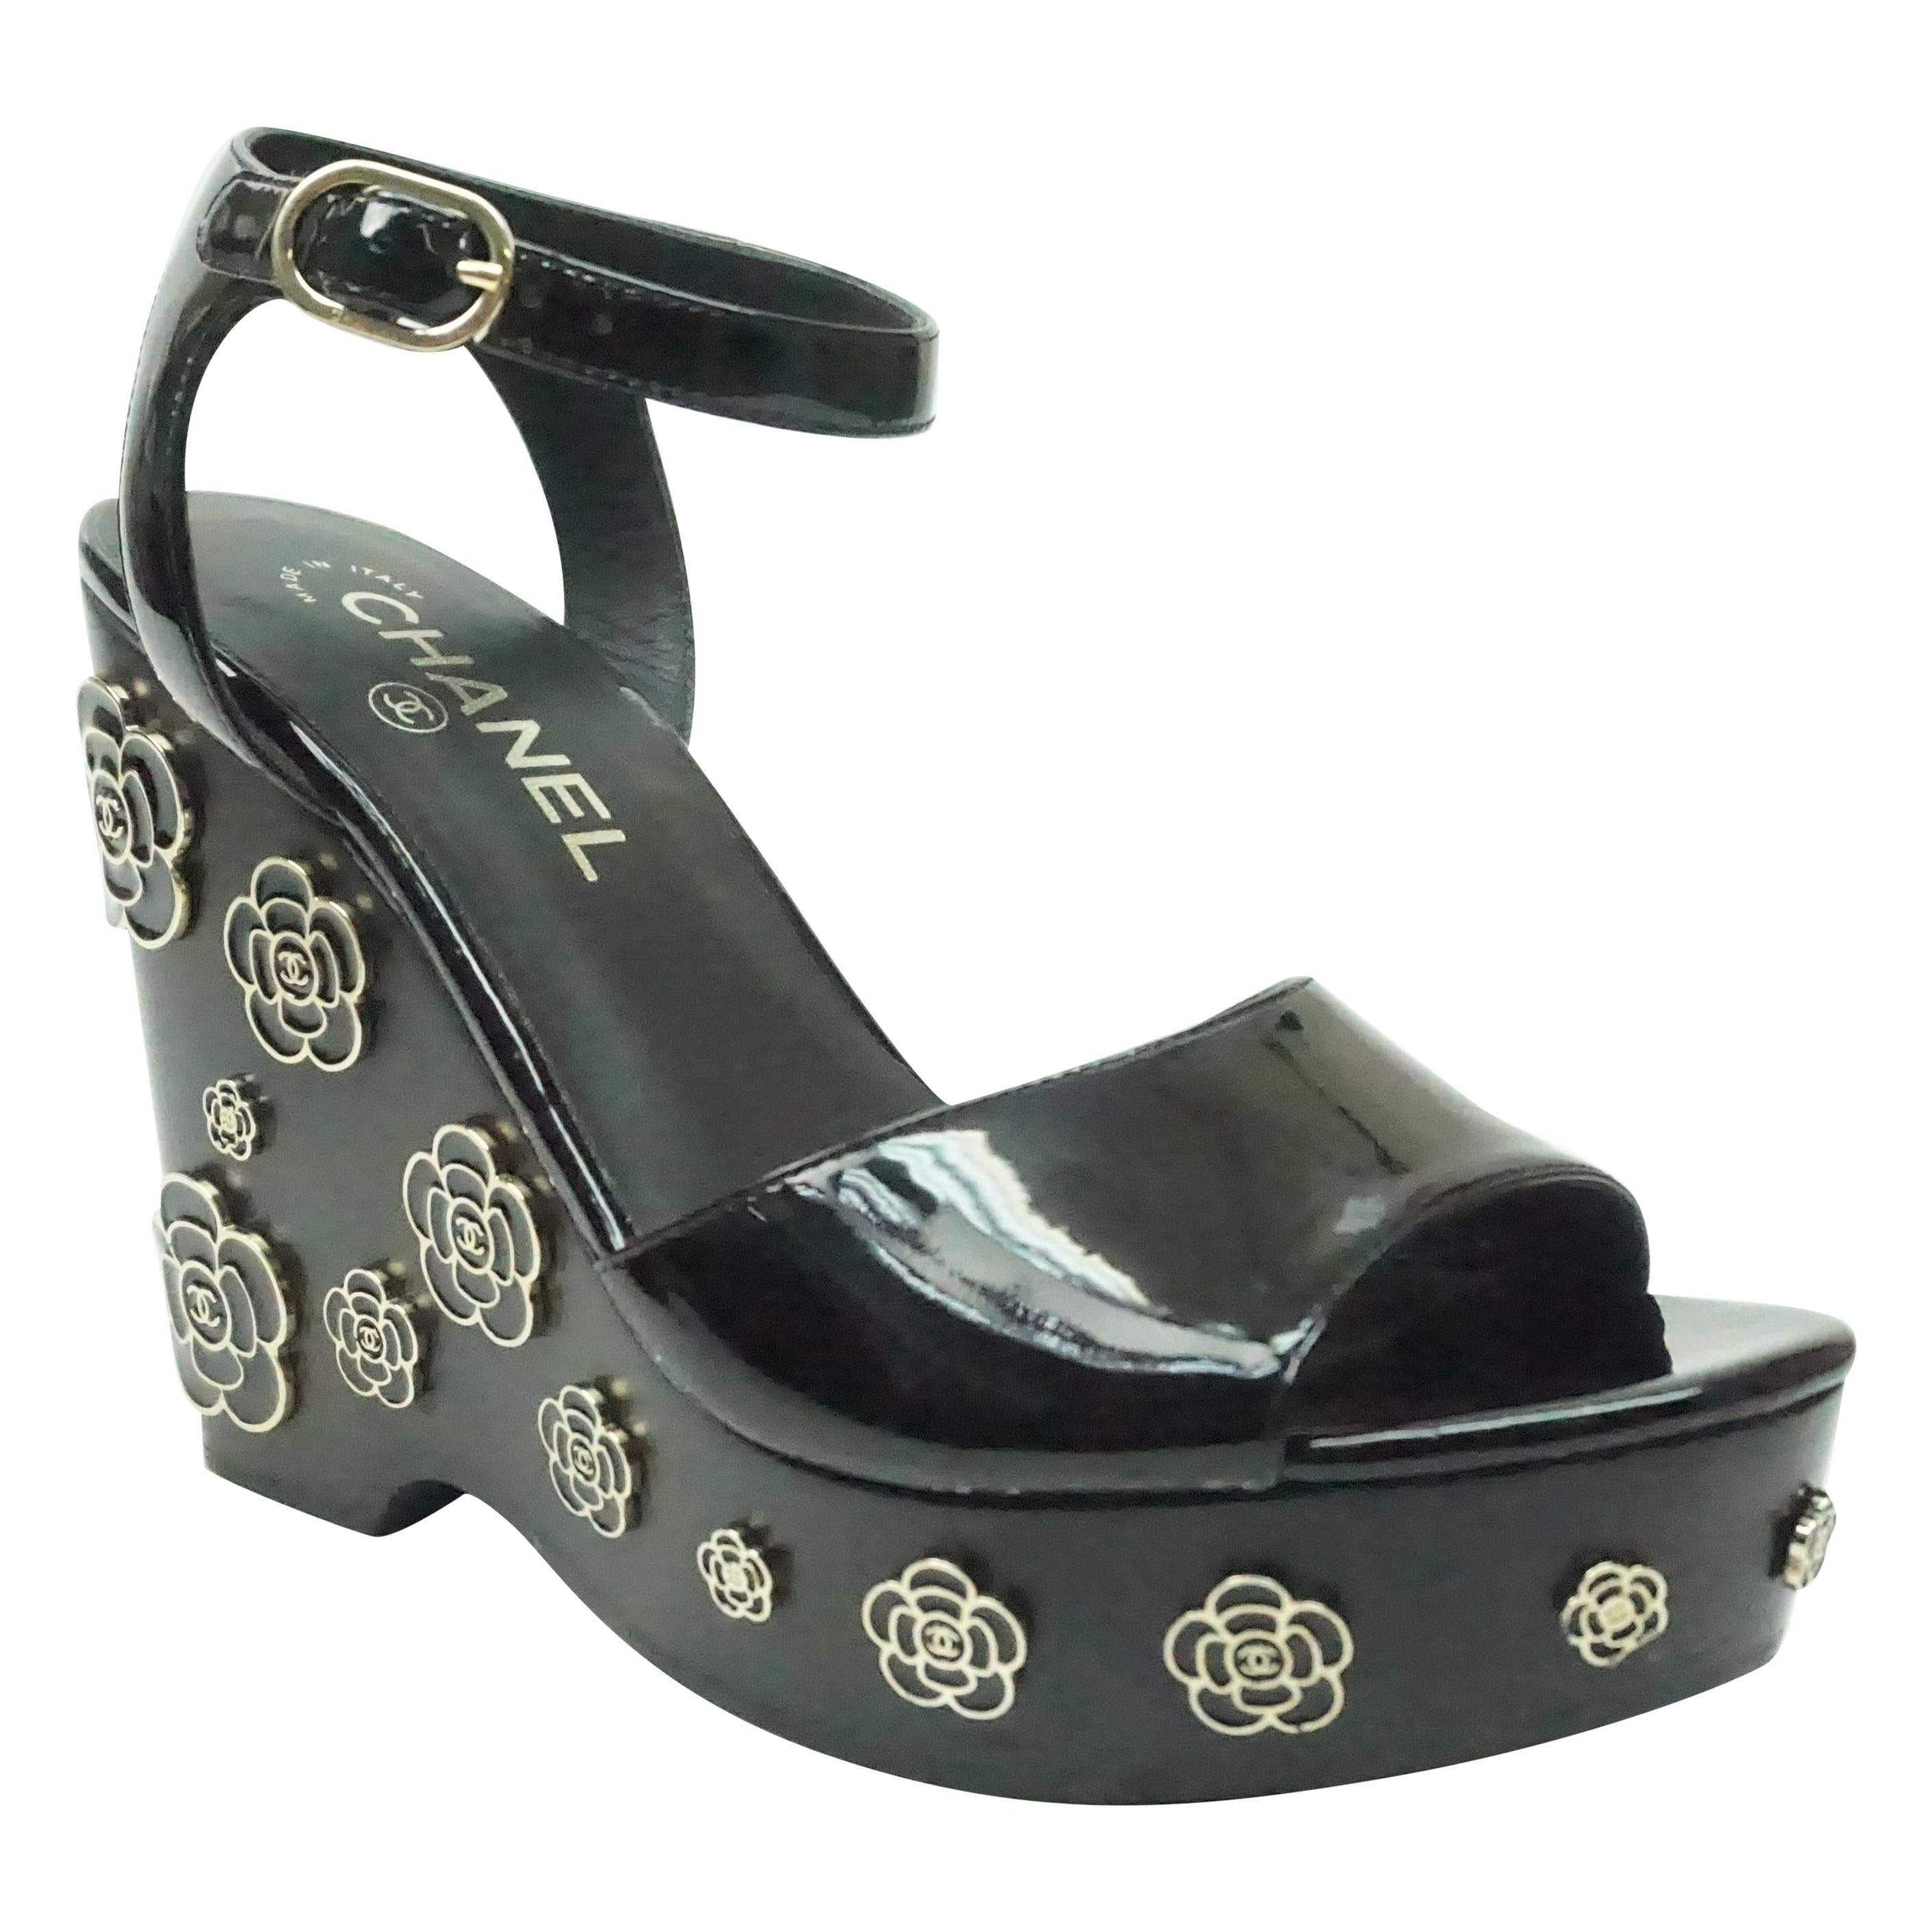 CHANEL Black Patent Wedge with Metal Camellias - 37.5